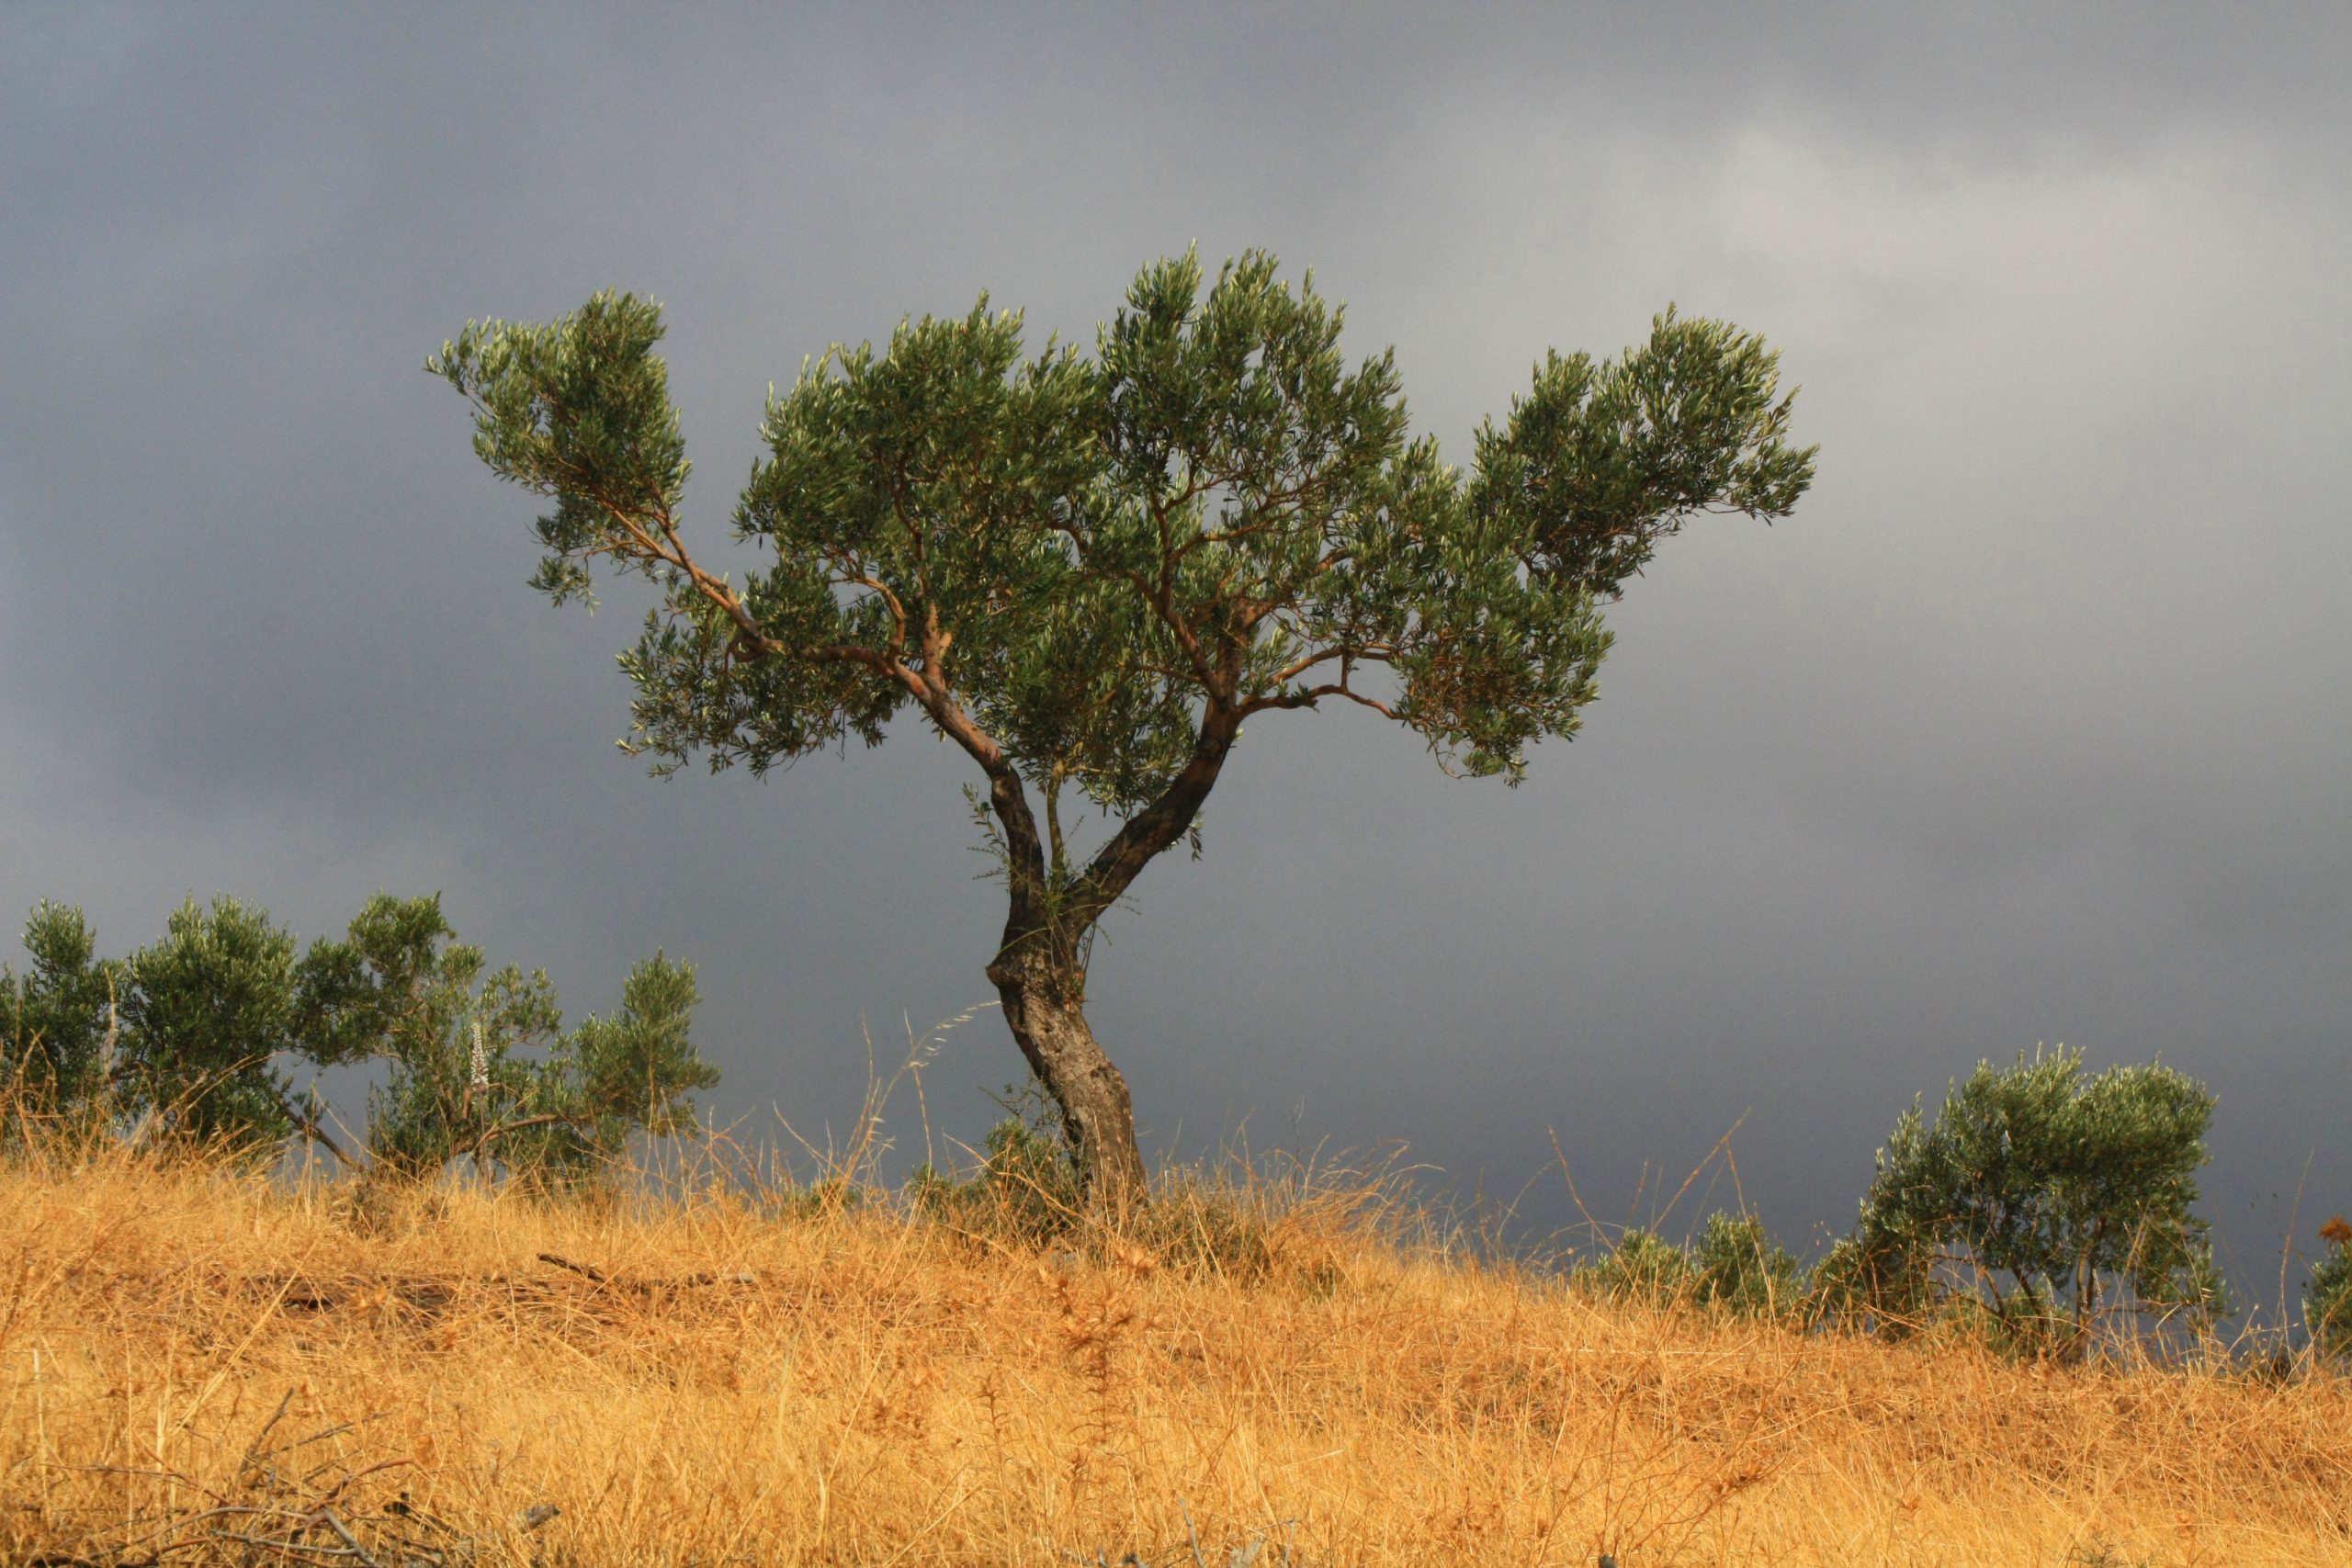 A young olive tree against a dark sky